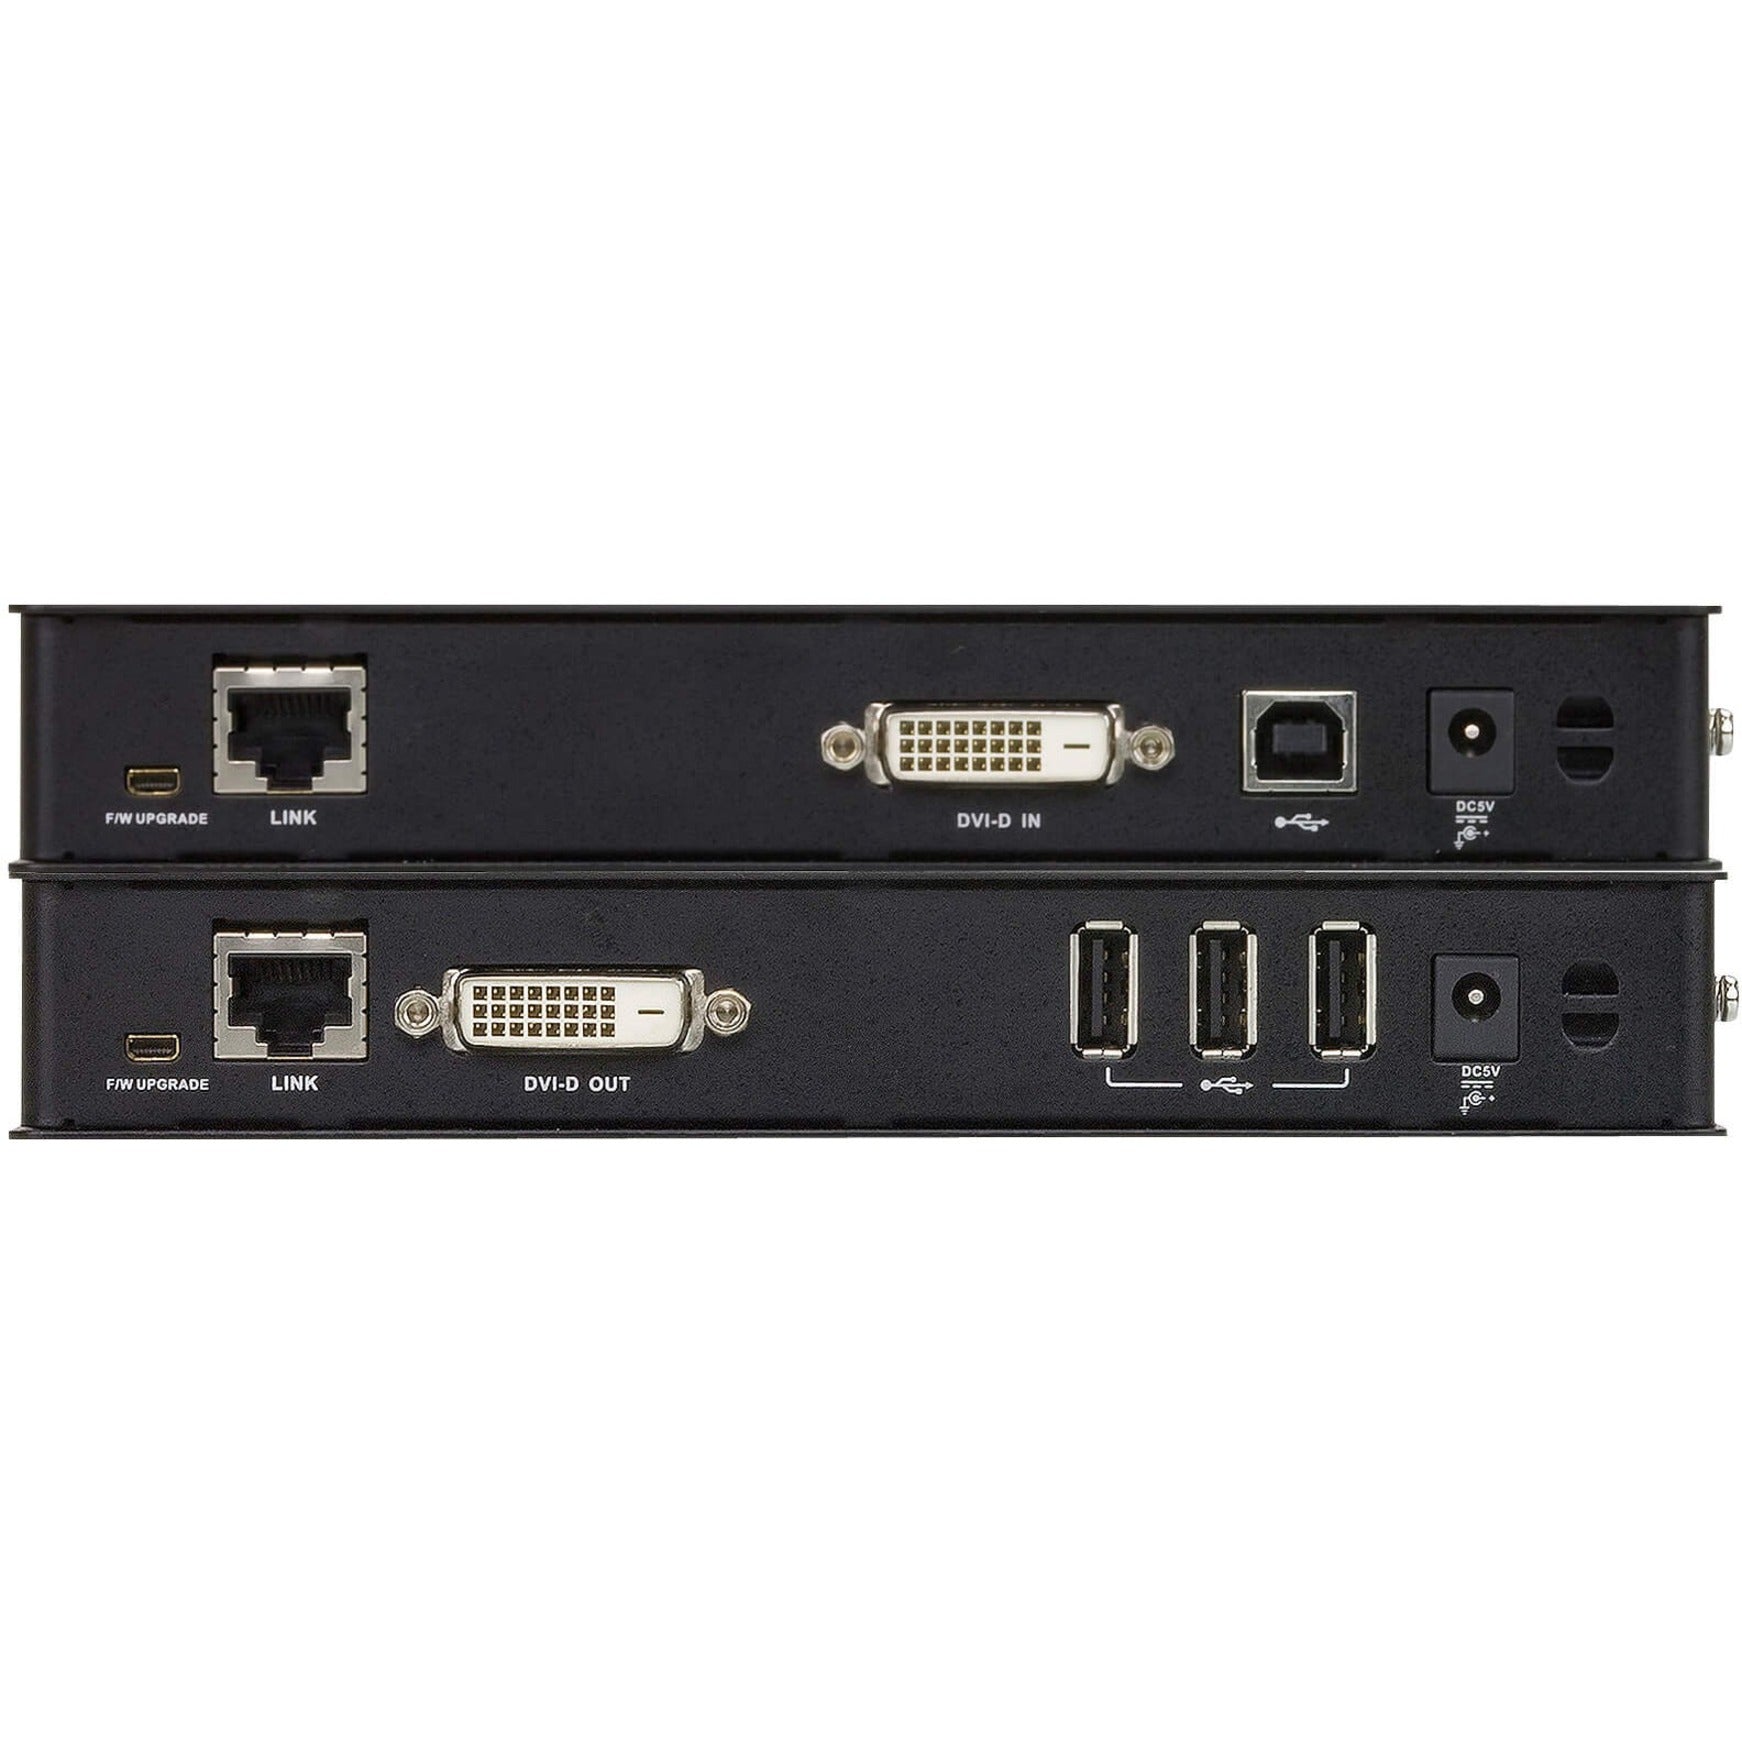 ATEN CE610A DVI HDBaseT KVM Extender with ExtremeUSB, Maximum Video Resolution 1920 x 1200, 328.08 ft Operating Distance